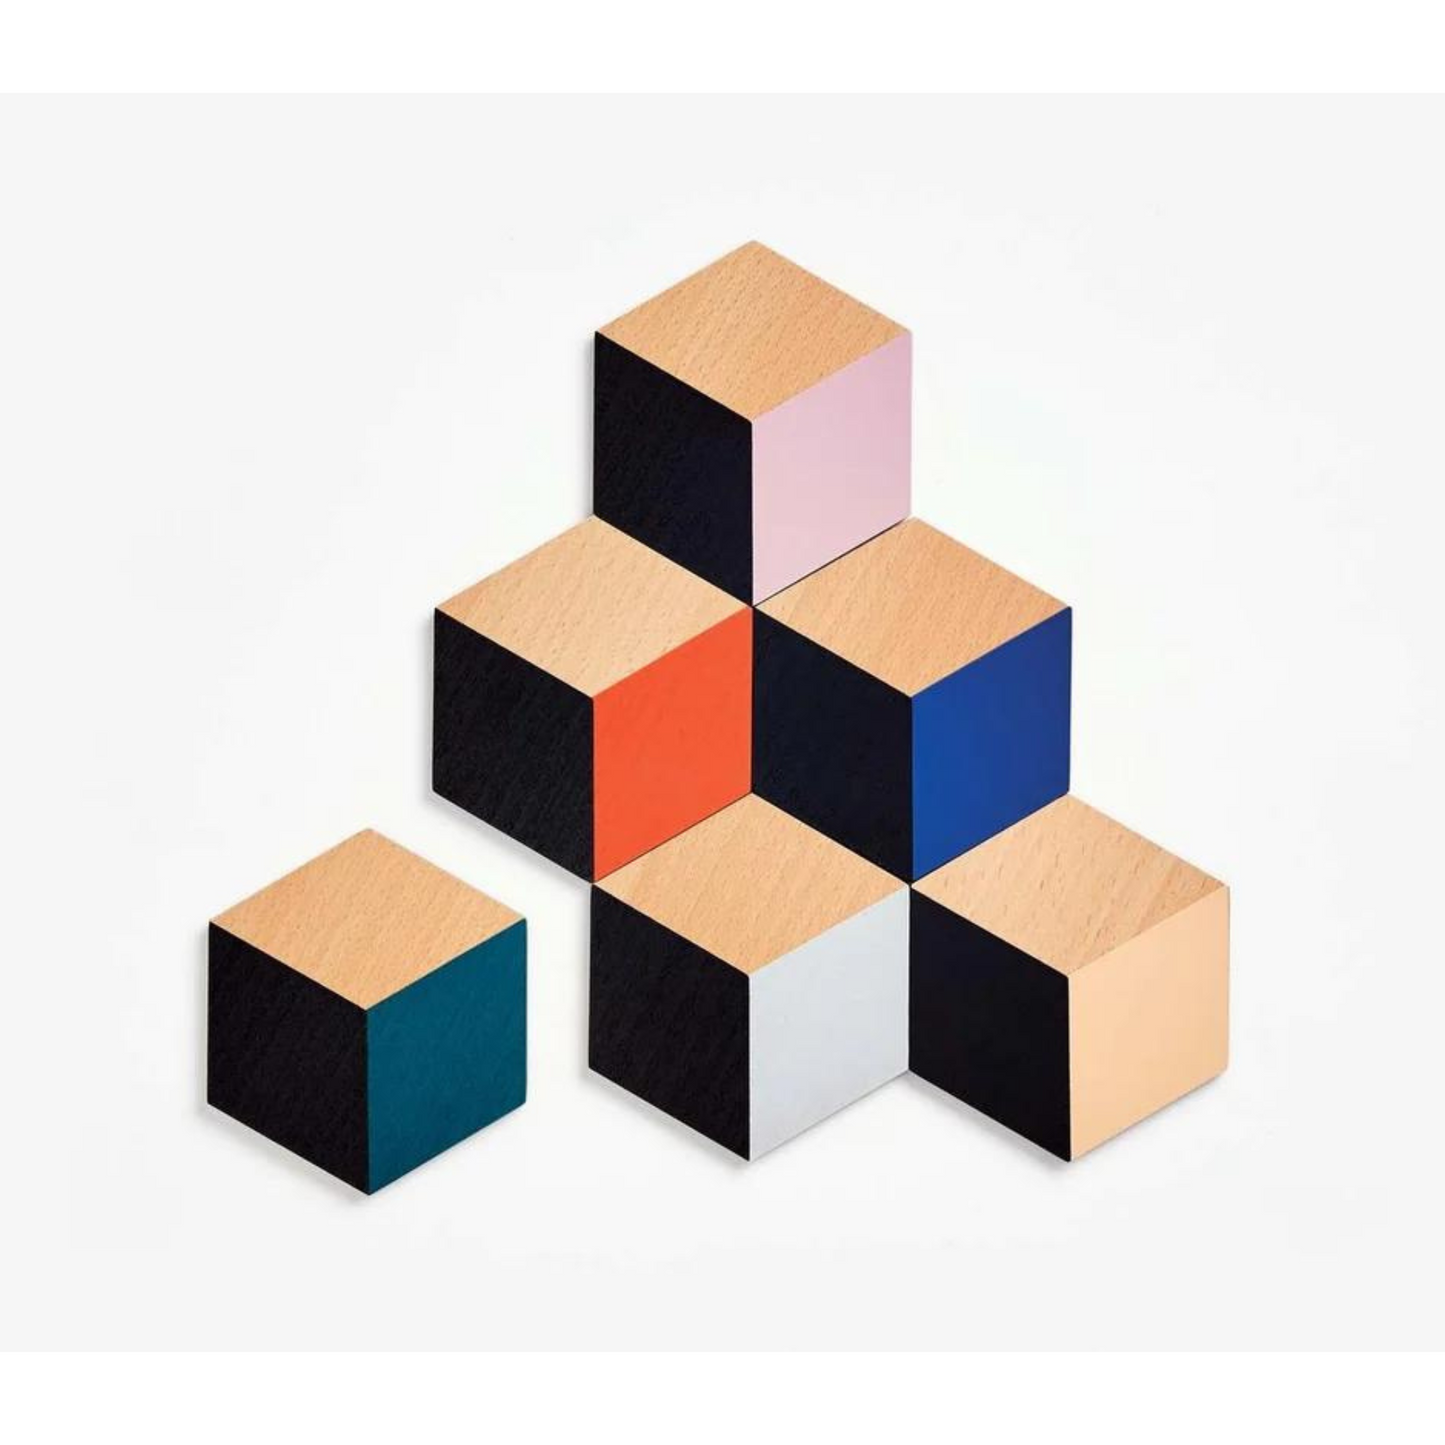 A set of 6 geometric coasters arranged in a pyramid